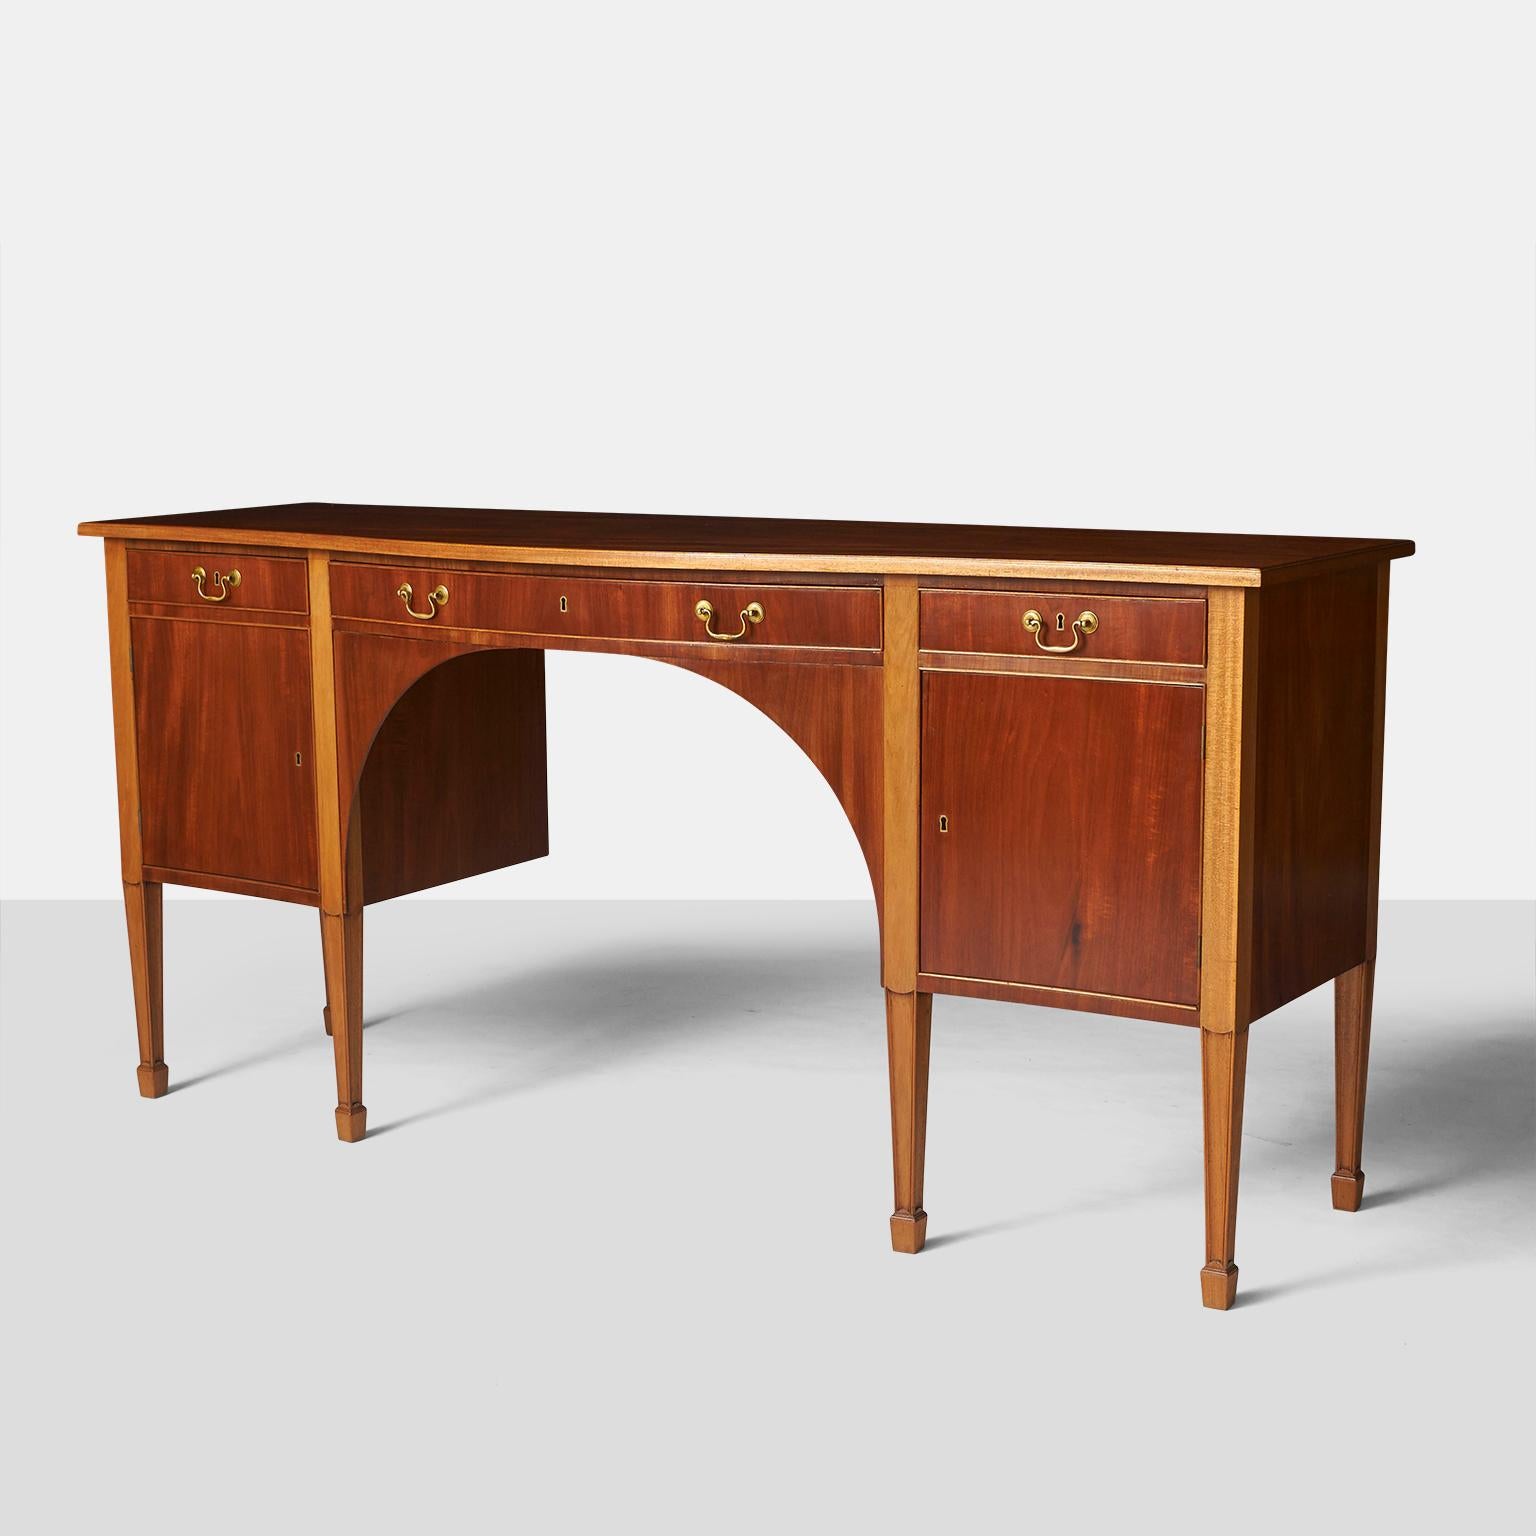 A mahogany Sheraton style sideboard, lightly curved front with three drawers and two doors behind which there are shelves. Tall tapered legs. Brass pulls. Key included.